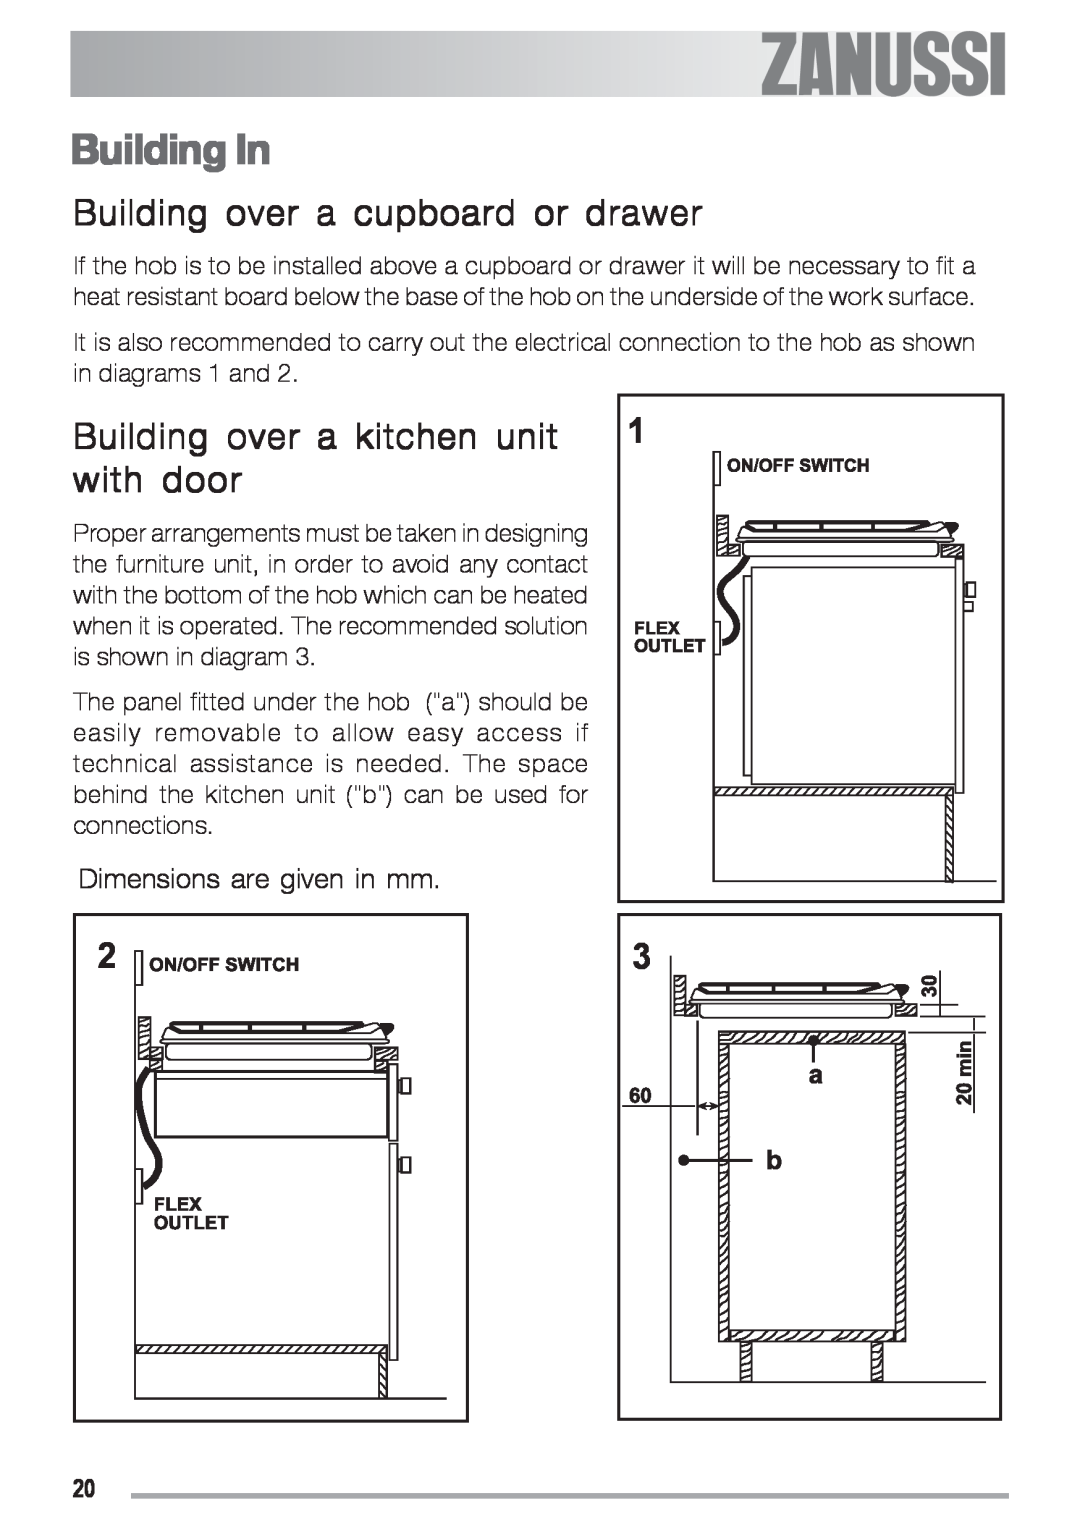 Zanussi ZGF 692 CT manual Building In, Building over a cupboard or drawer, Building over a kitchen unit with door 